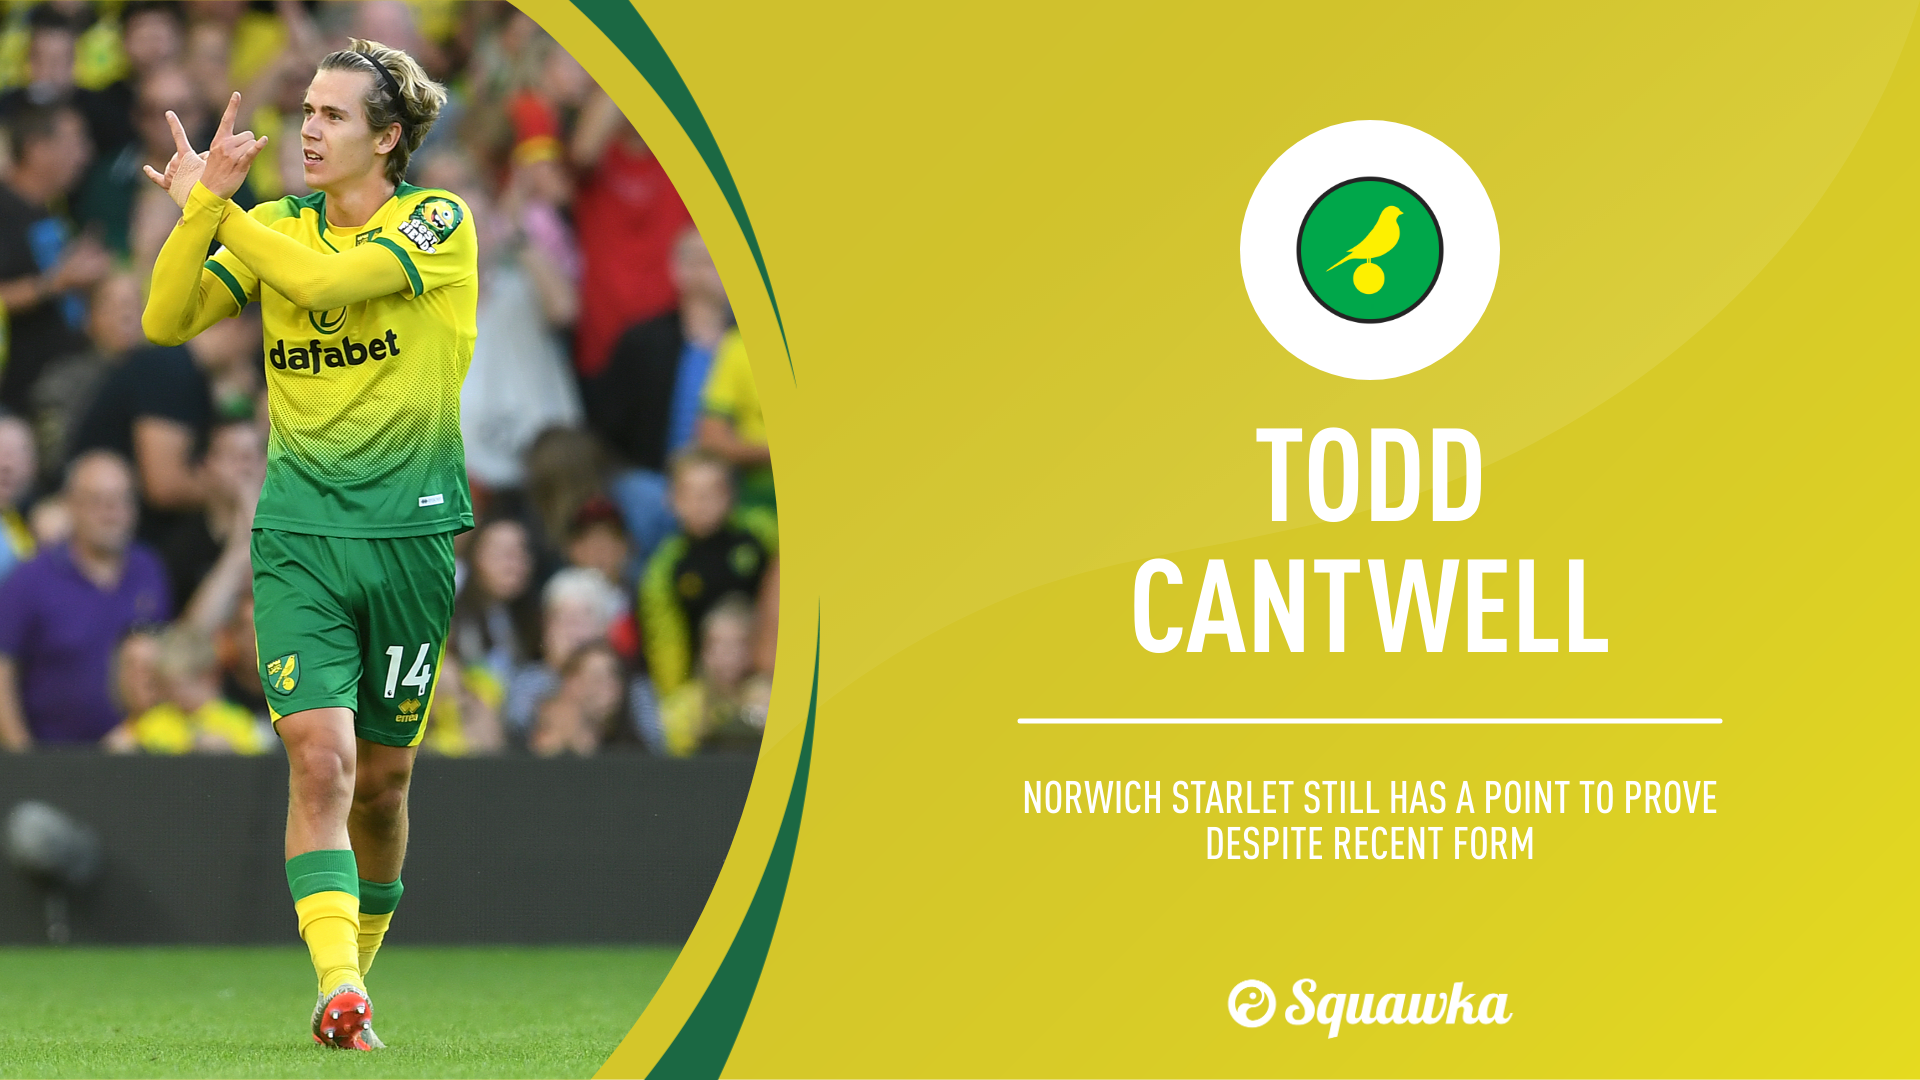 Todd Cantwell: Norwich Starlet Still Has A Long Term Point To Prove